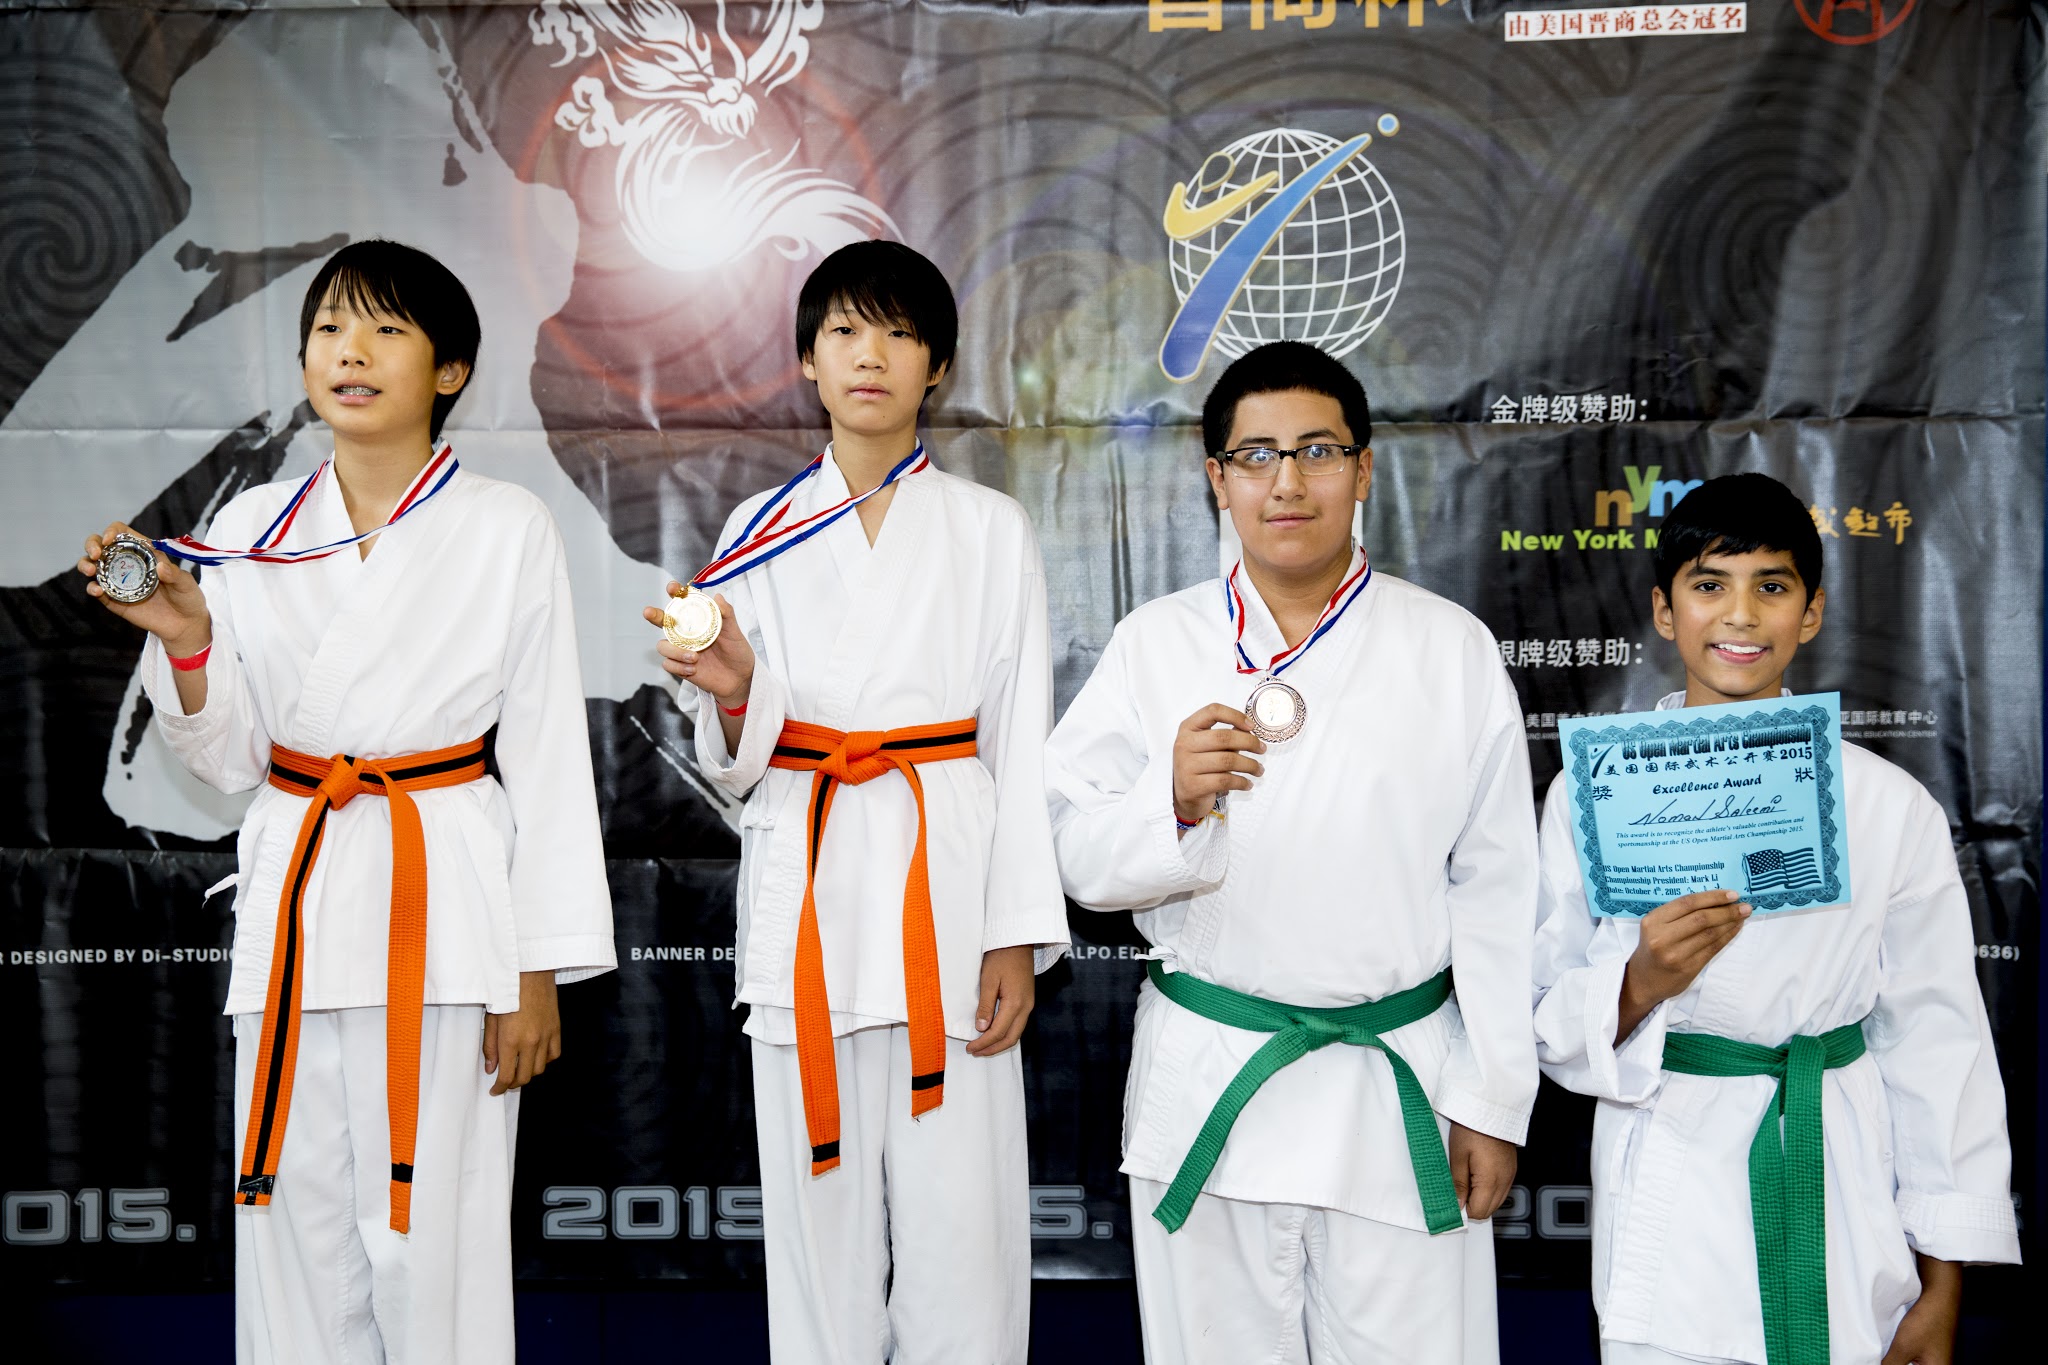 Medal award 2015 photos at the US Open Martial Arts Championship organized by the WFMAF.